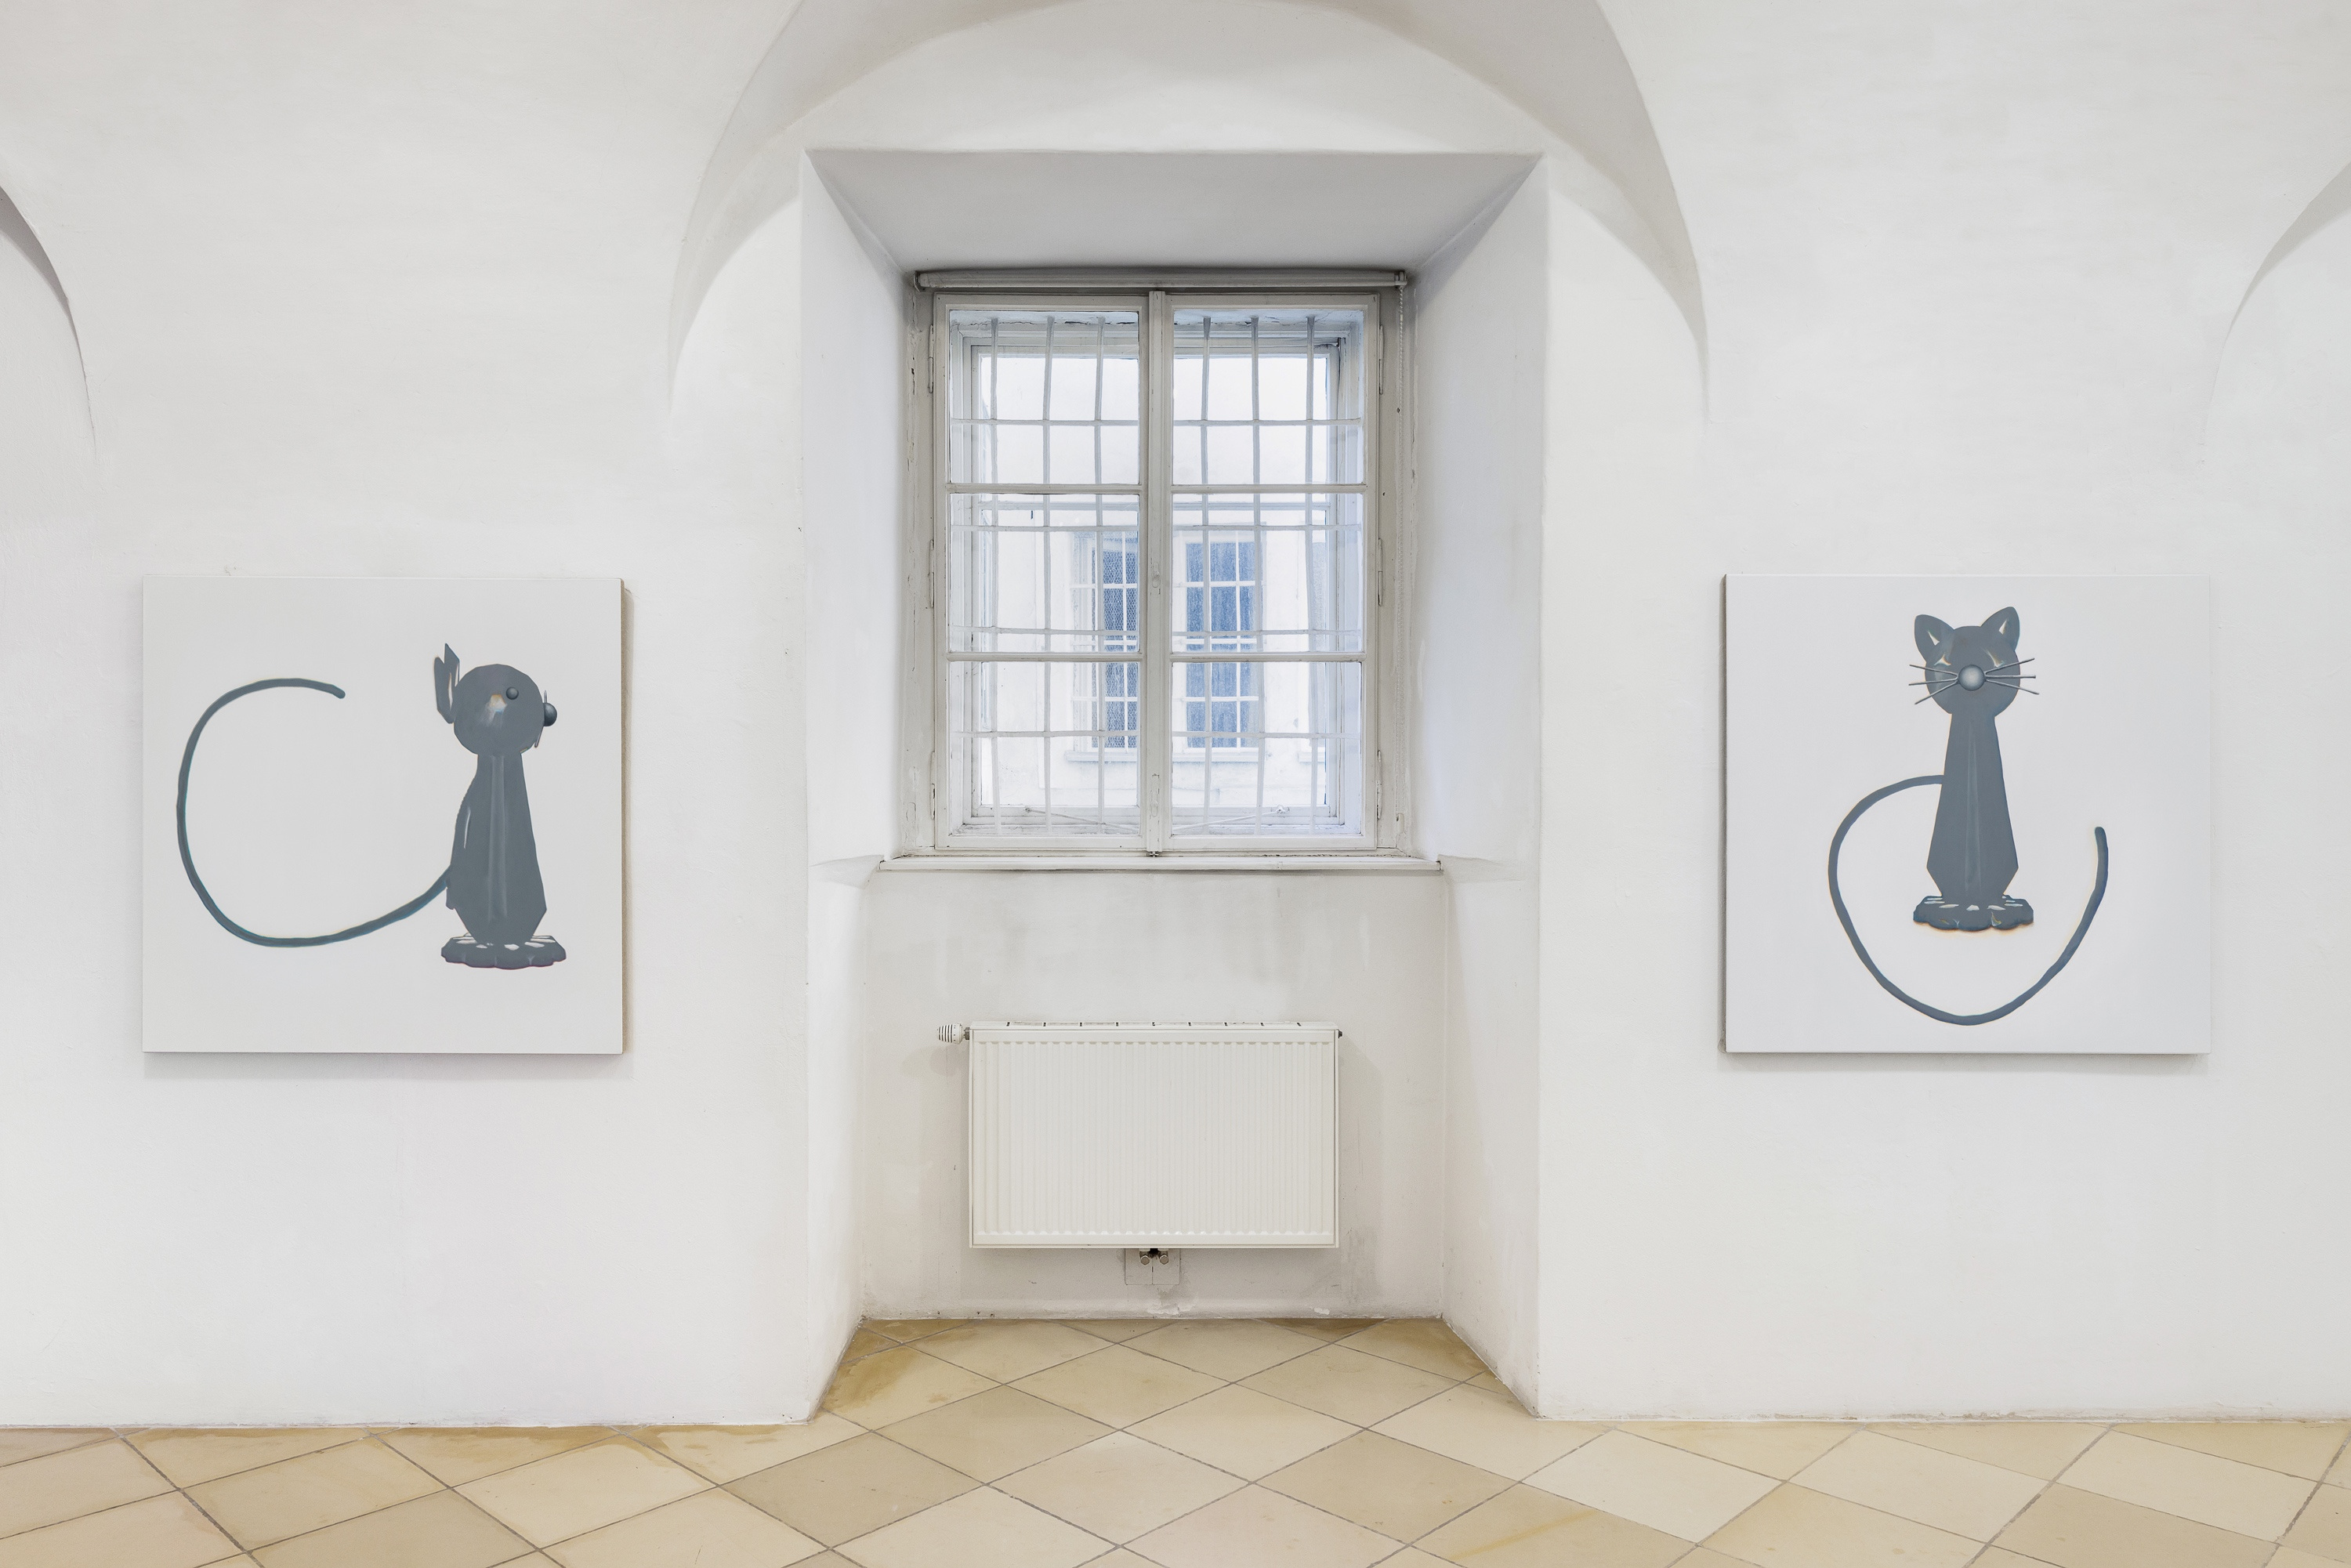 Demian Kern, To be titled (Katze 2), To be titled (Katze 1), 2022, Installation view Capture Captures, curated by Lucie Pia, UniversitÃ¤tsgalerie der Angewandten im Heiligenkreuzerhof, Sala Terrena, Wien, 2022 (from left to right)